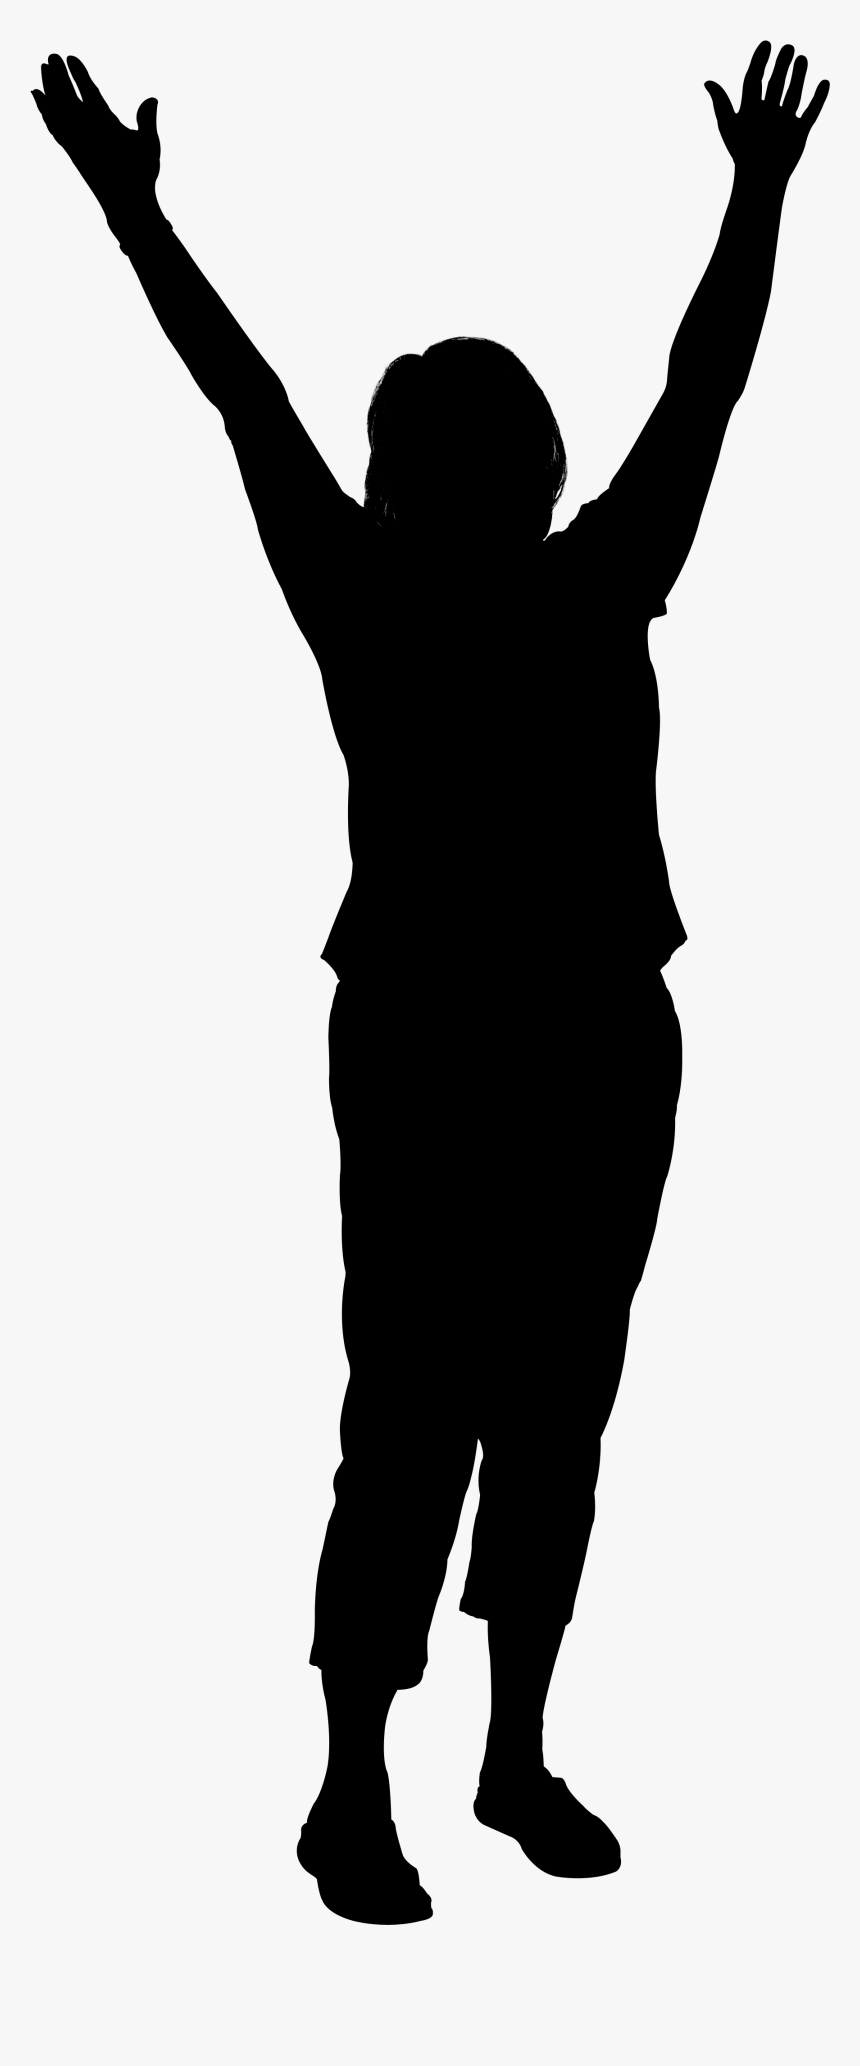 Clip Art Image Wrestling Professional Wrestler Silhouette - Silhouette, HD Png Download, Free Download